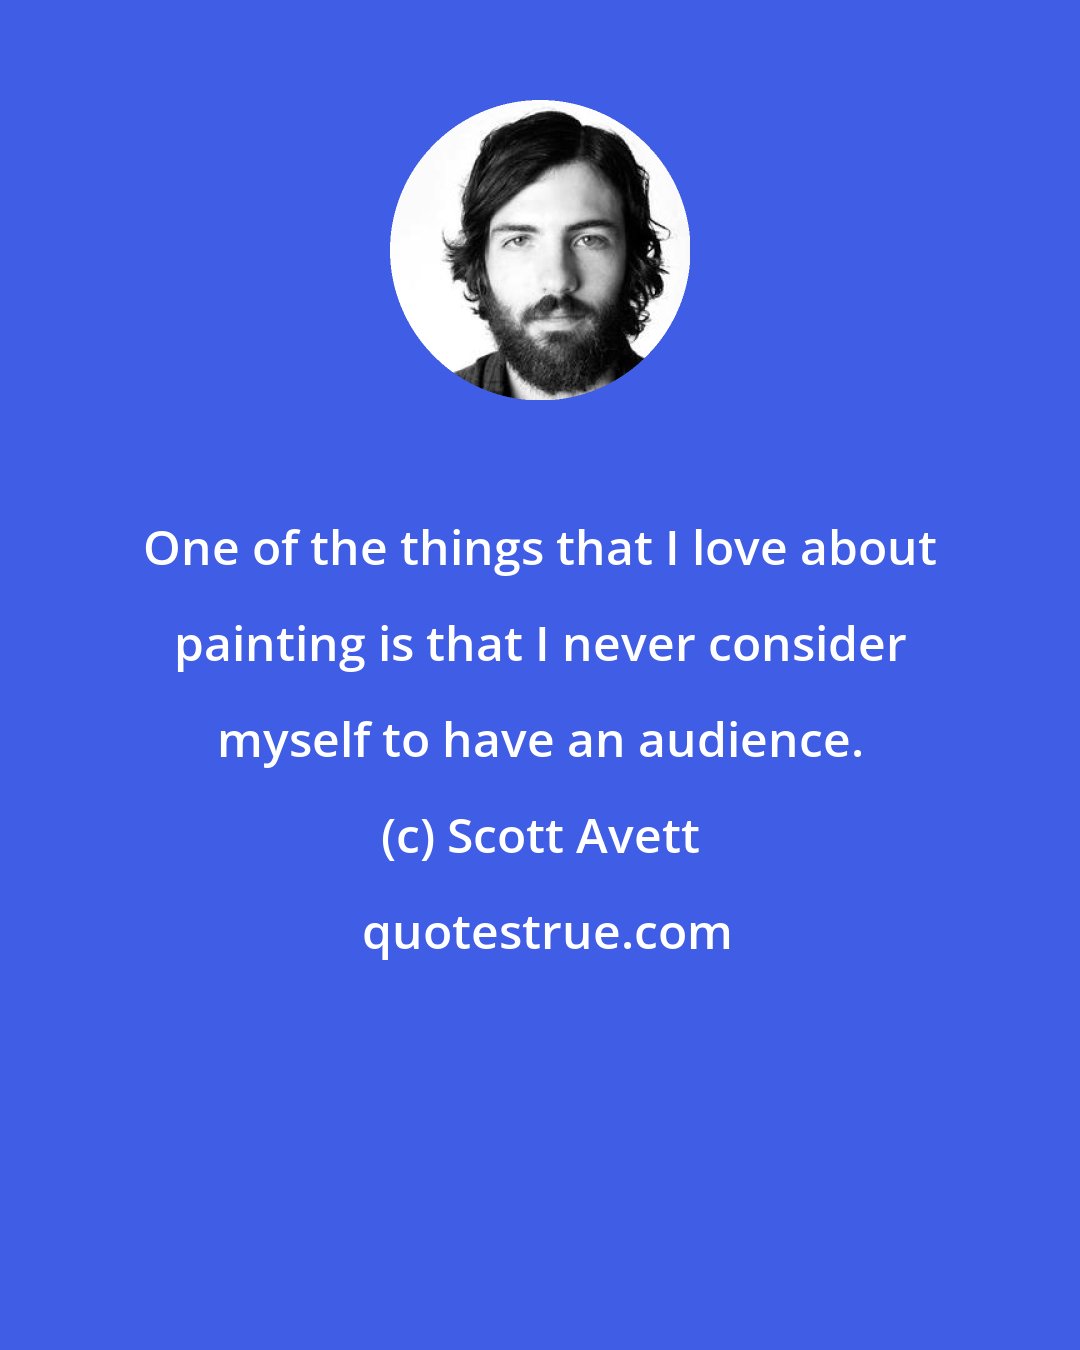 Scott Avett: One of the things that I love about painting is that I never consider myself to have an audience.